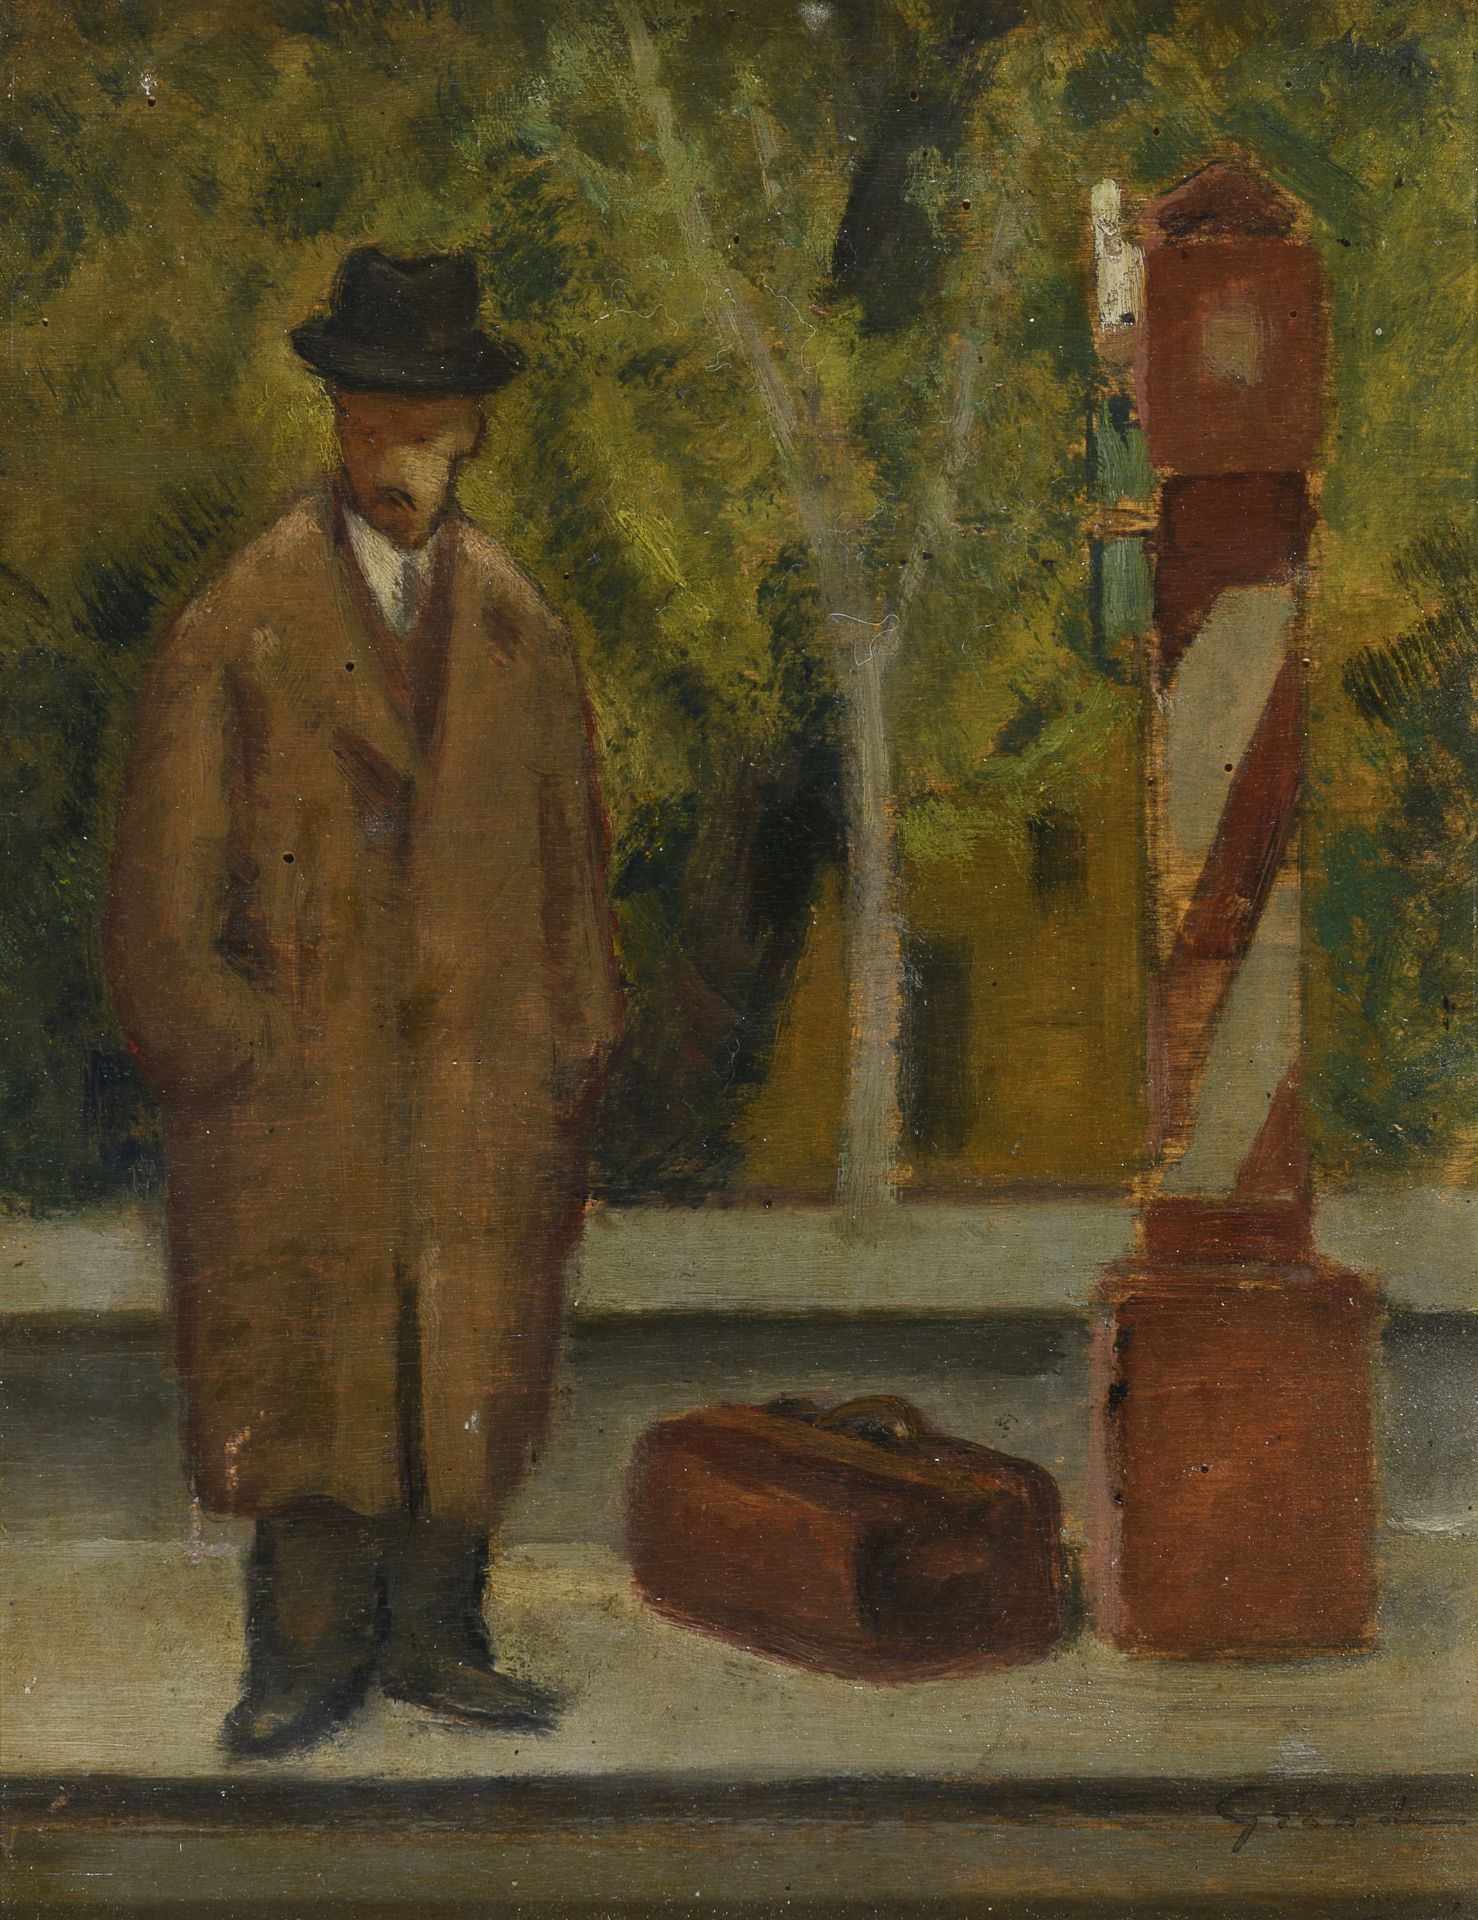 OIL PAINTING OF A MAN WITH SUITCASE 20TH CENTURY